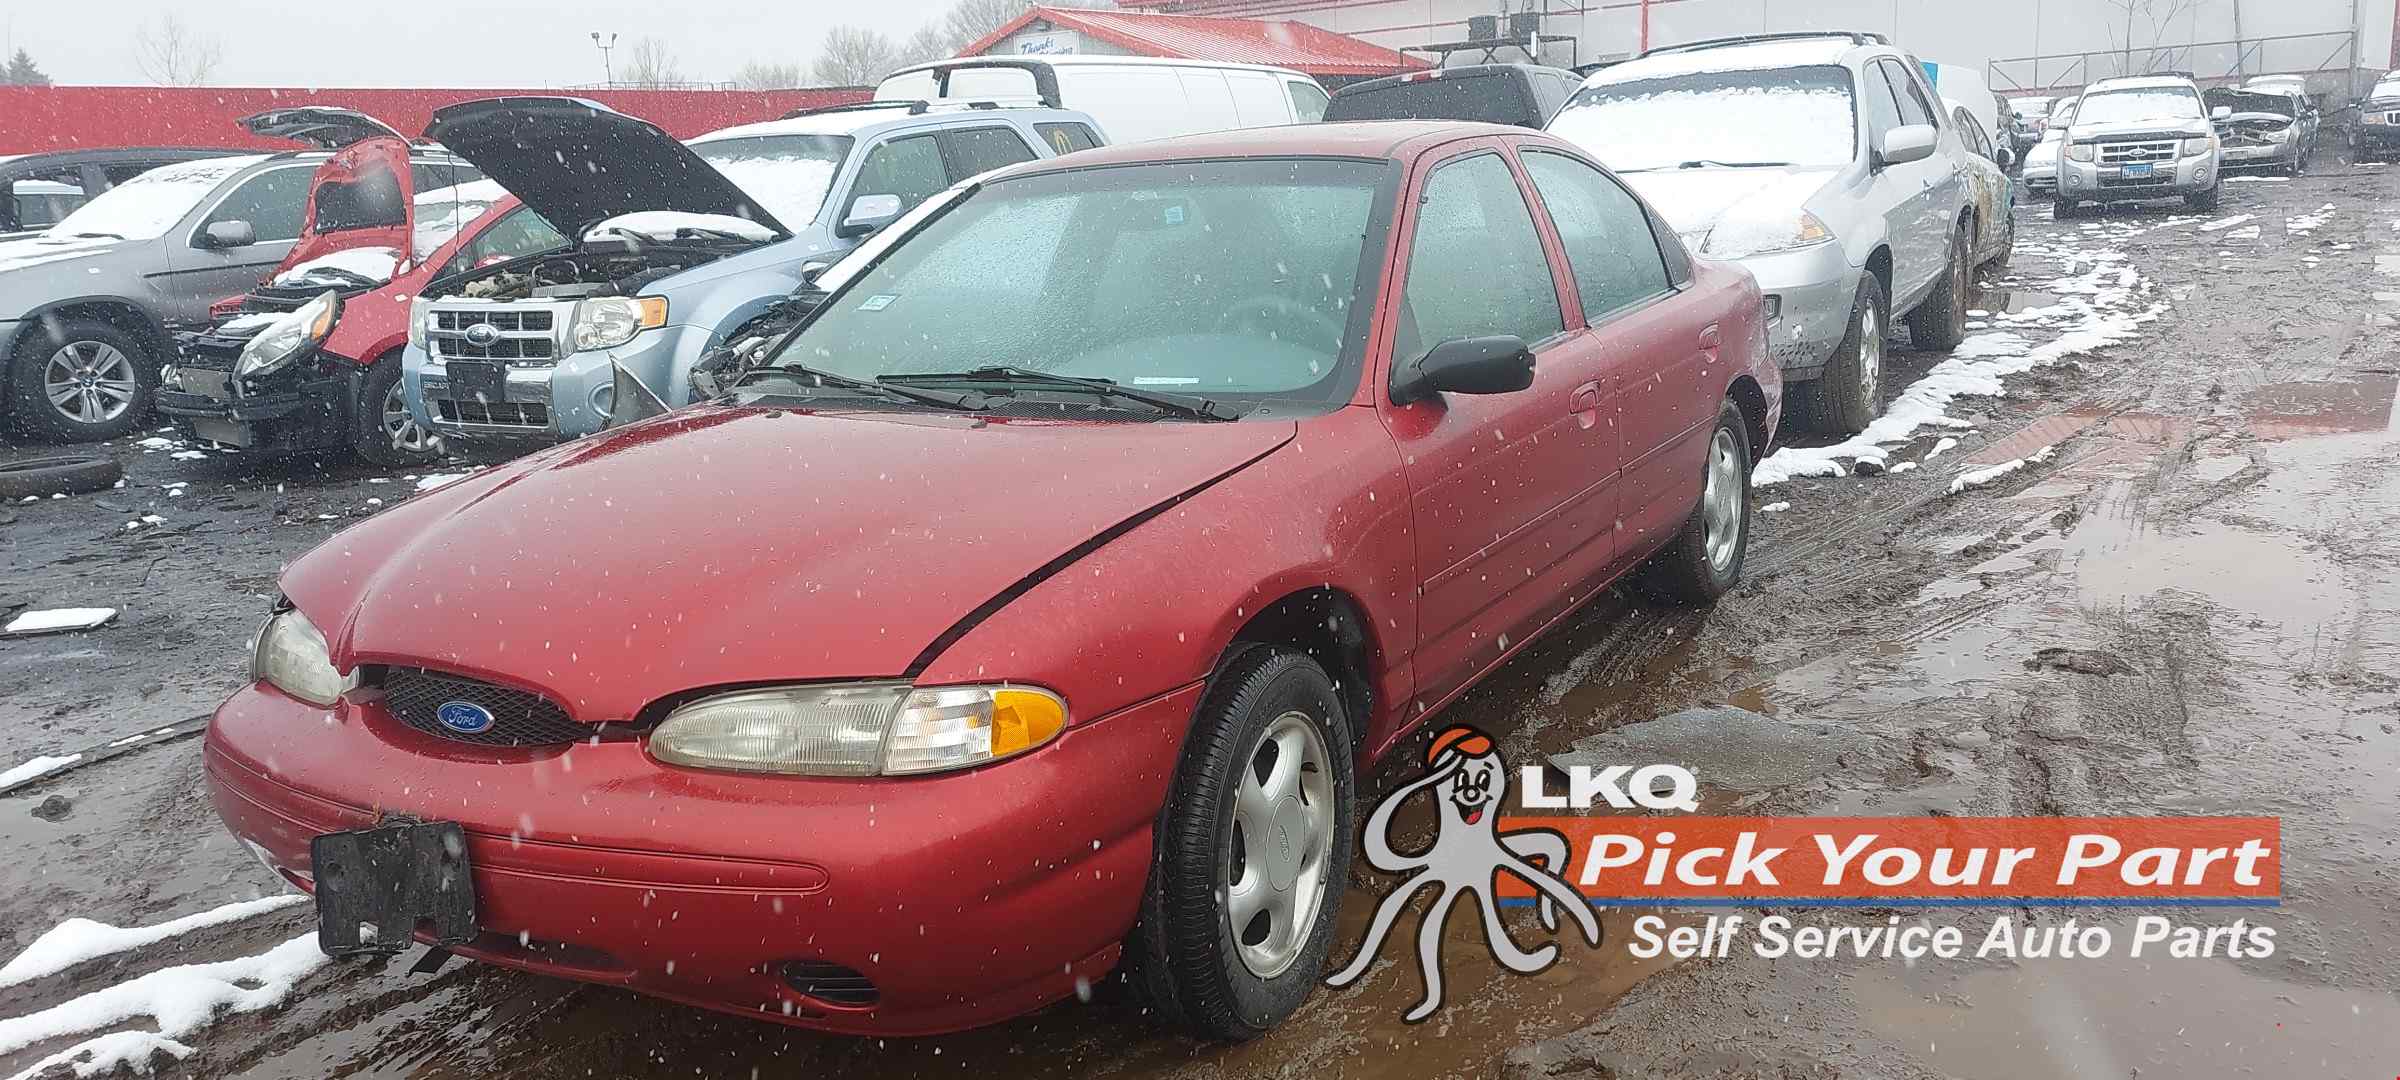 1997 Ford Contour Used Auto Parts | Chicago